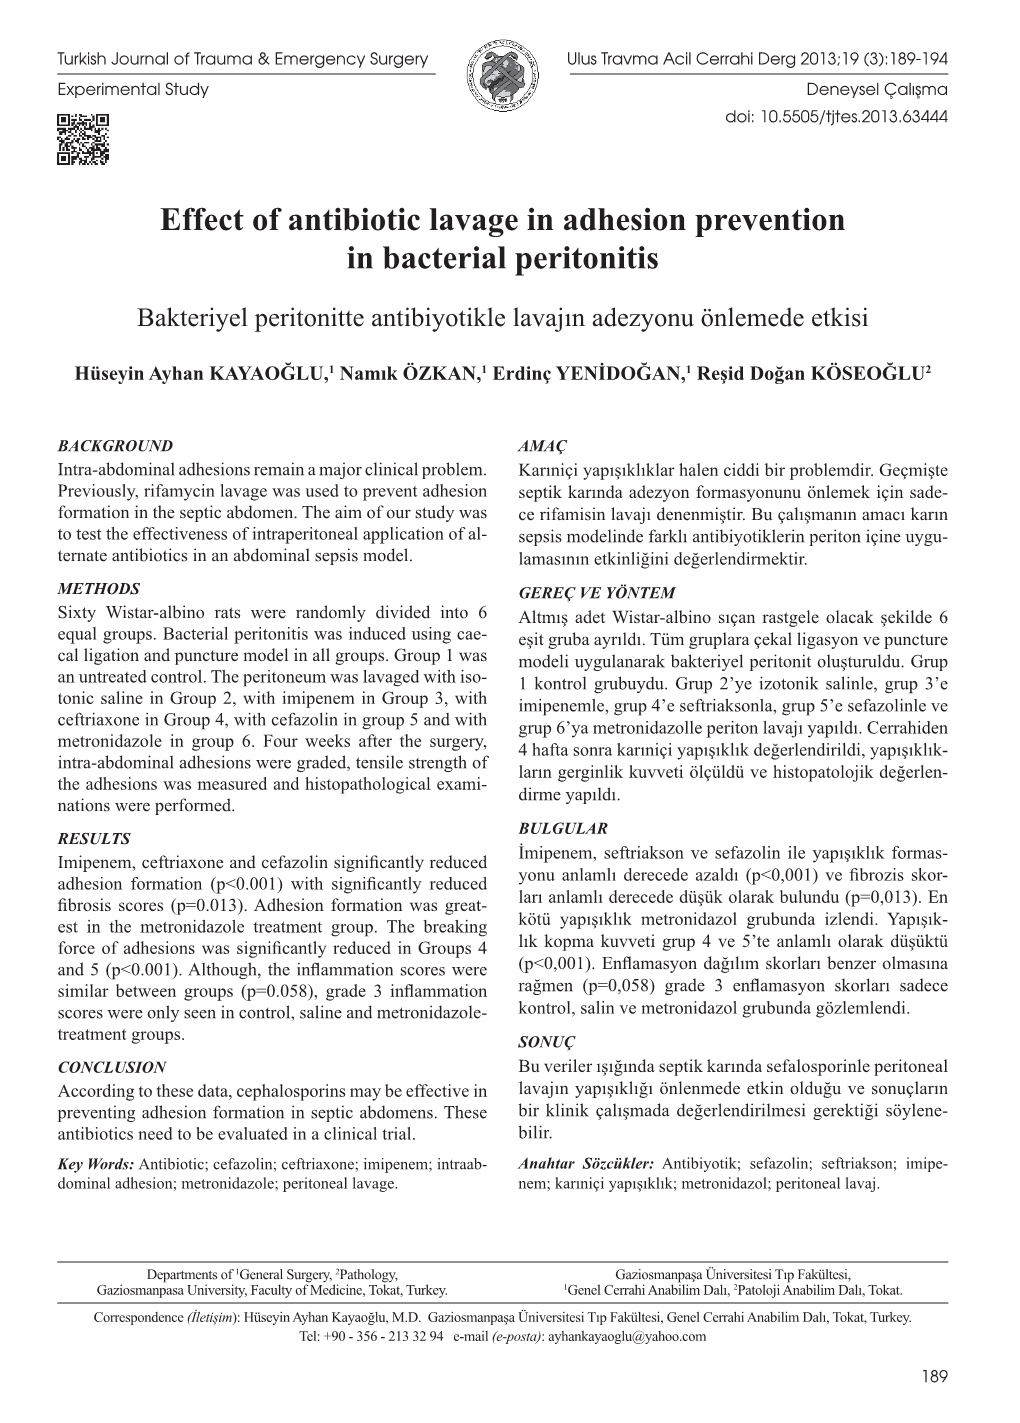 Effect of Antibiotic Lavage in Adhesion Prevention in Bacterial Peritonitis